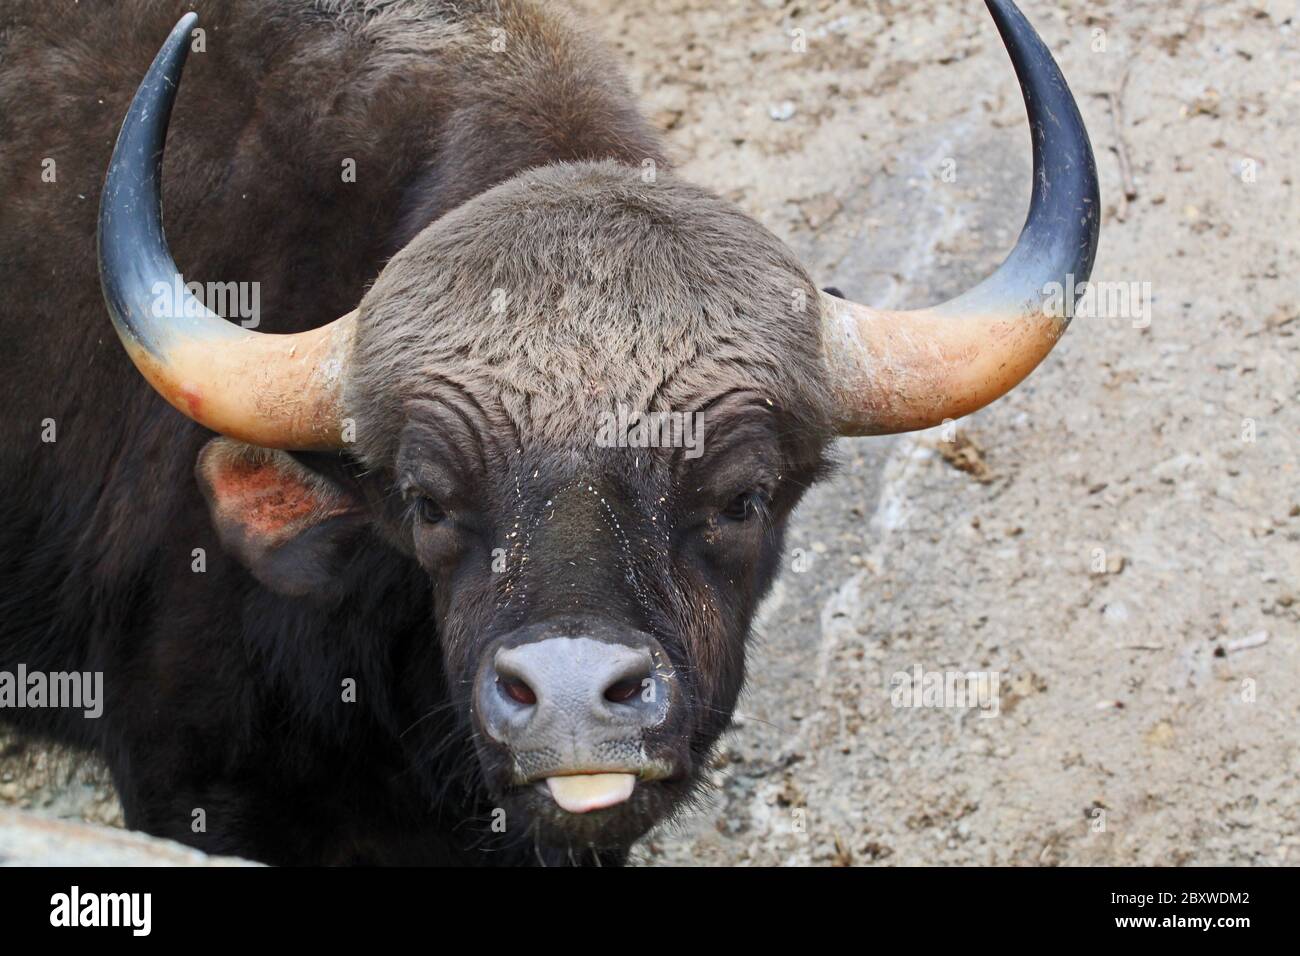 Bos gaurus. The gaur is the largest bovine and is native to South Asia and  Southeast Asia Stock Photo - Alamy